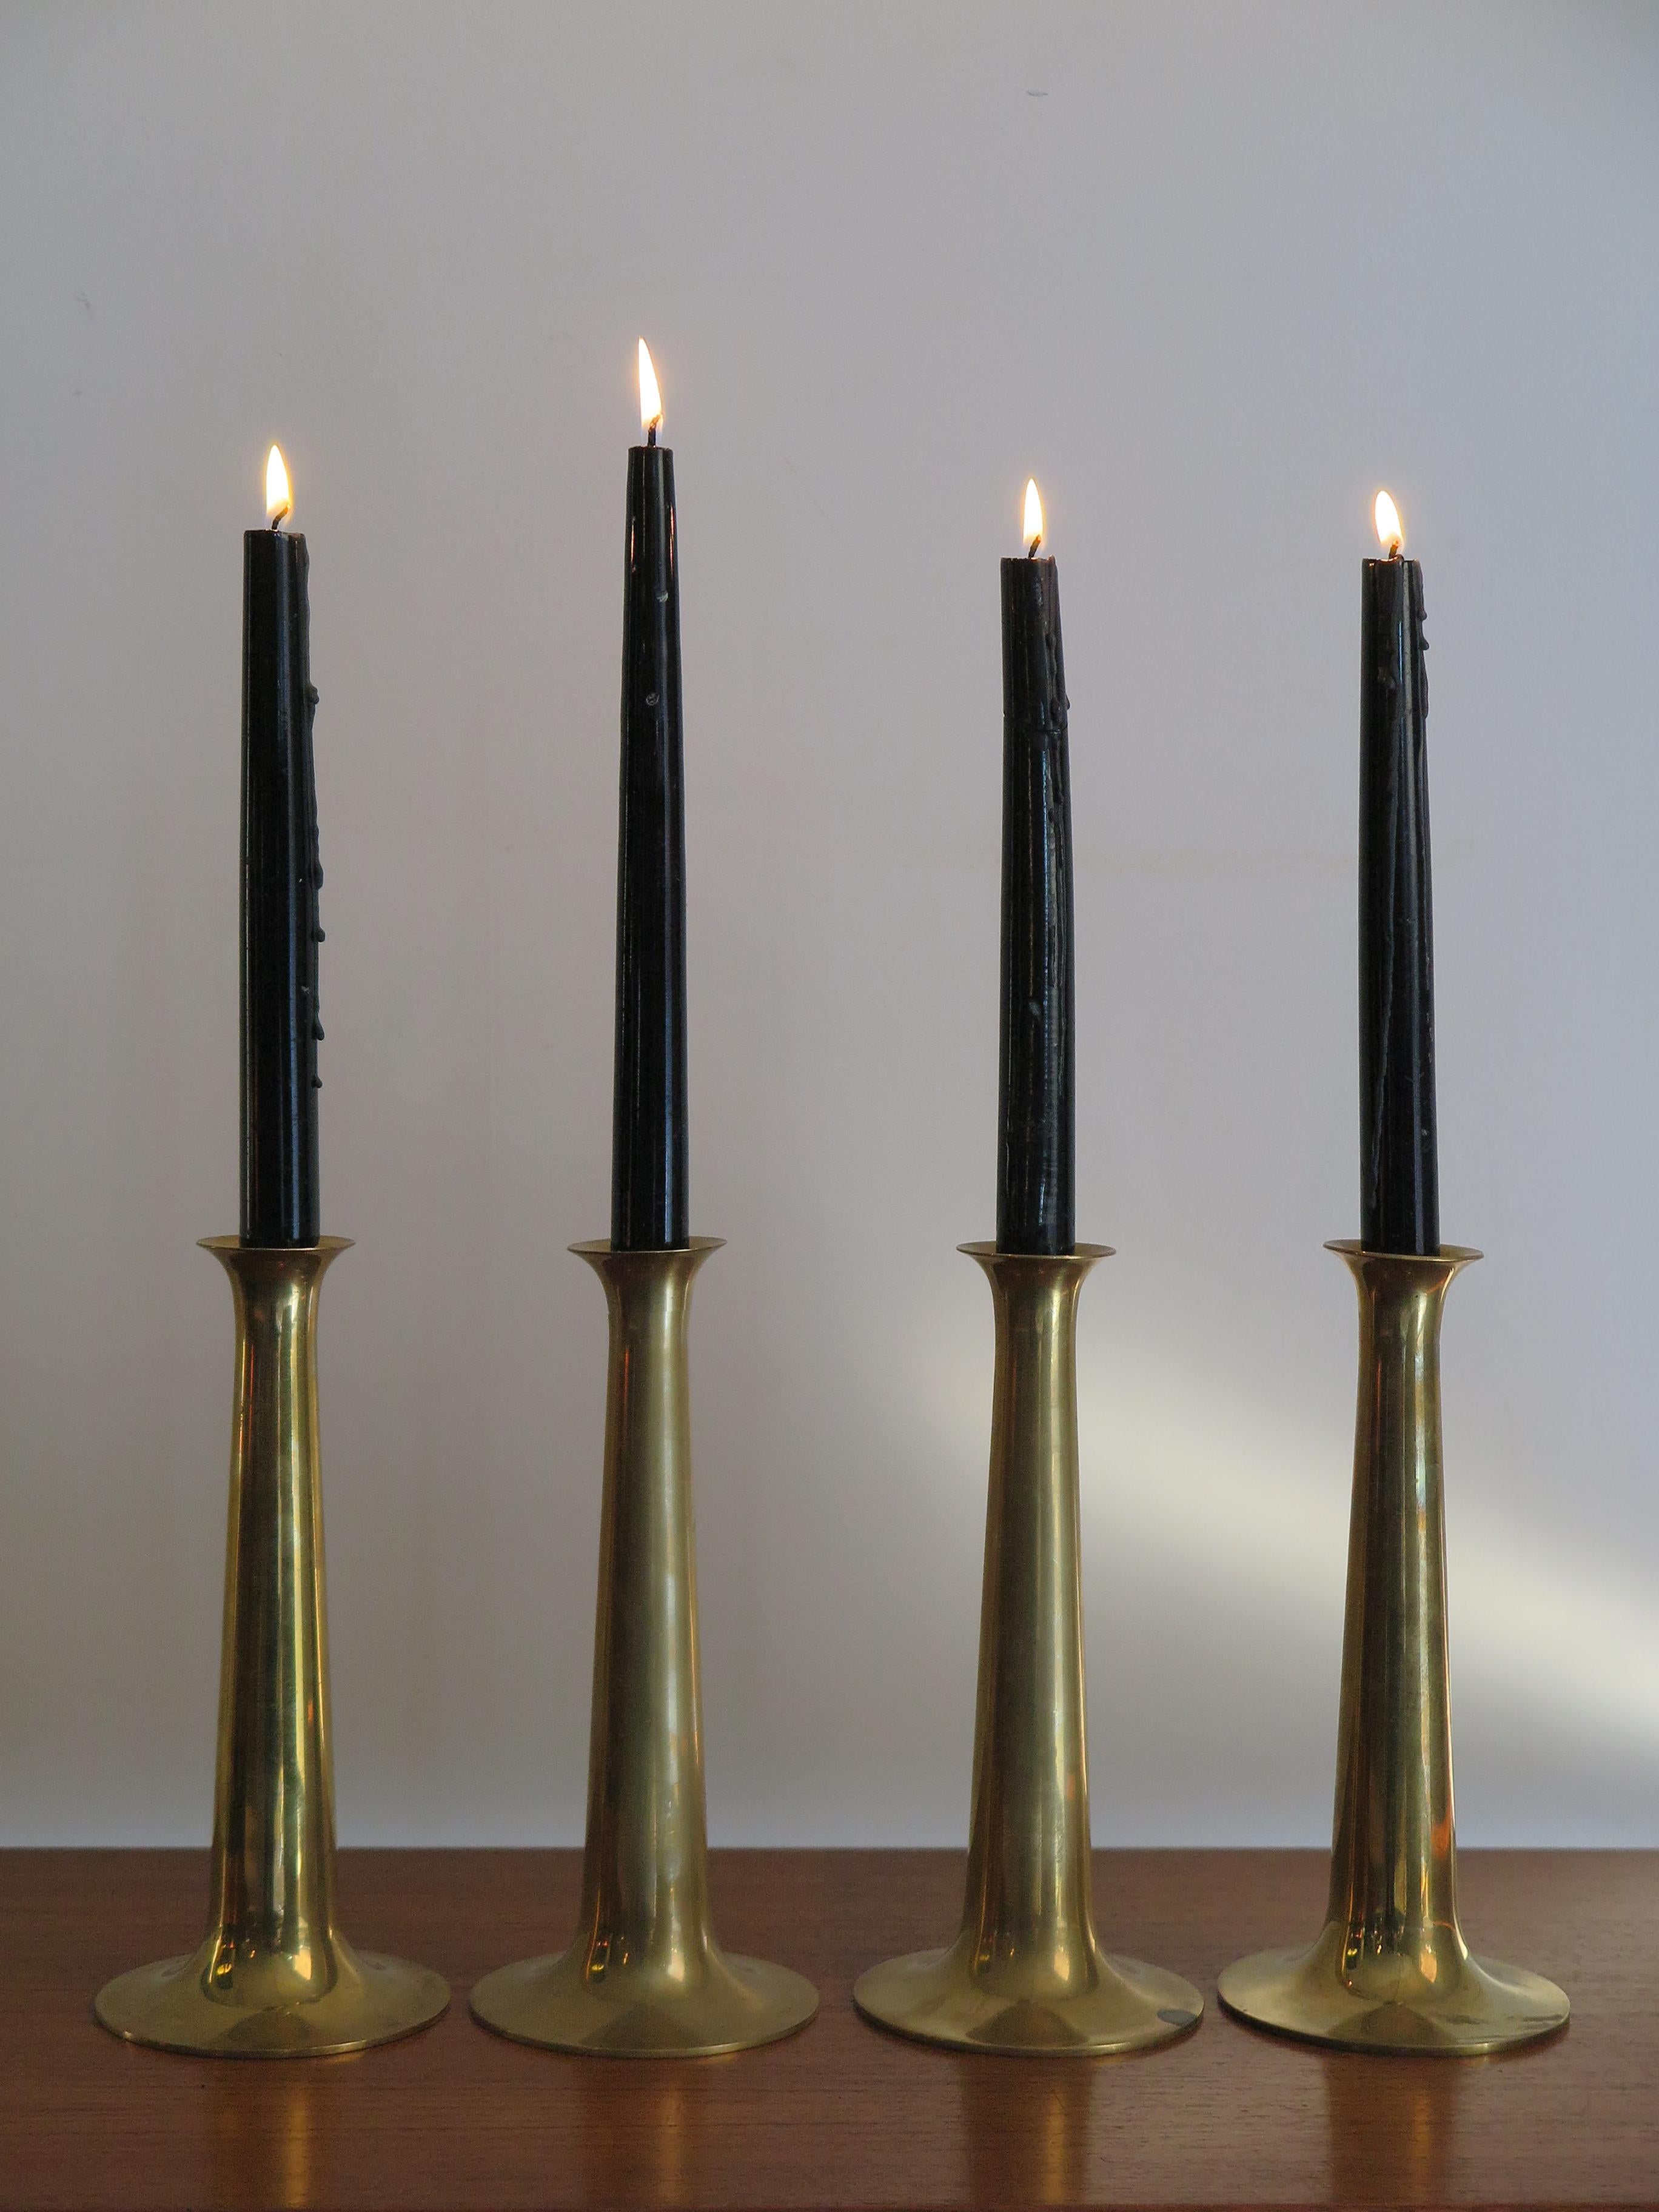 Set of Scandinavian midcentury modern candlesticks designed by Hans Bolling and manufactured by Torben Orskov in Denmark, they are made from solid brass and feature the manufacturer's mark to each base, 1950s.

Please note that the items are